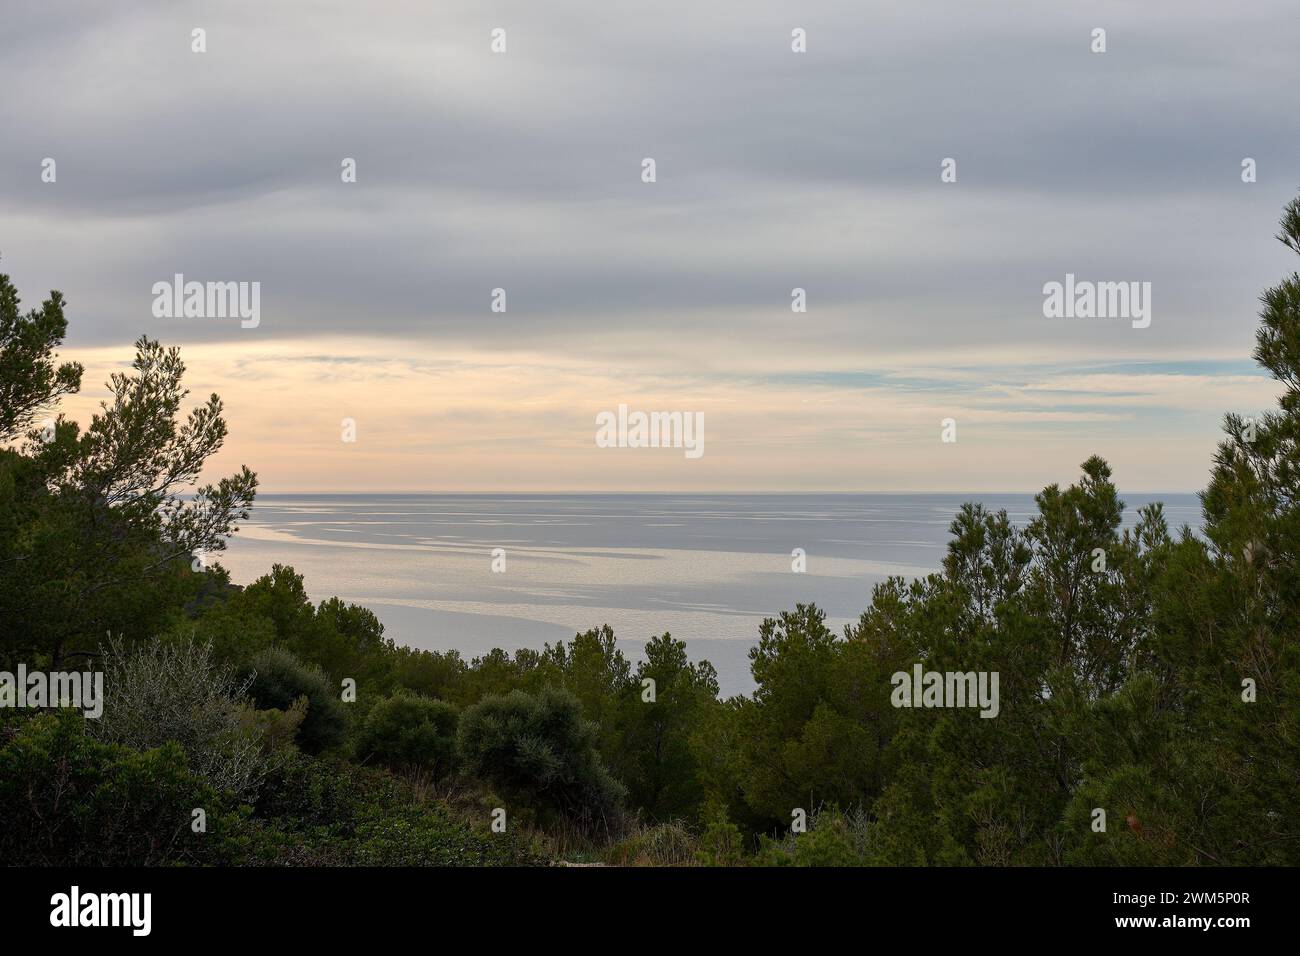 The view of the Mediterranean from the Soller lighthouse in Mallorca, Spain Stock Photo